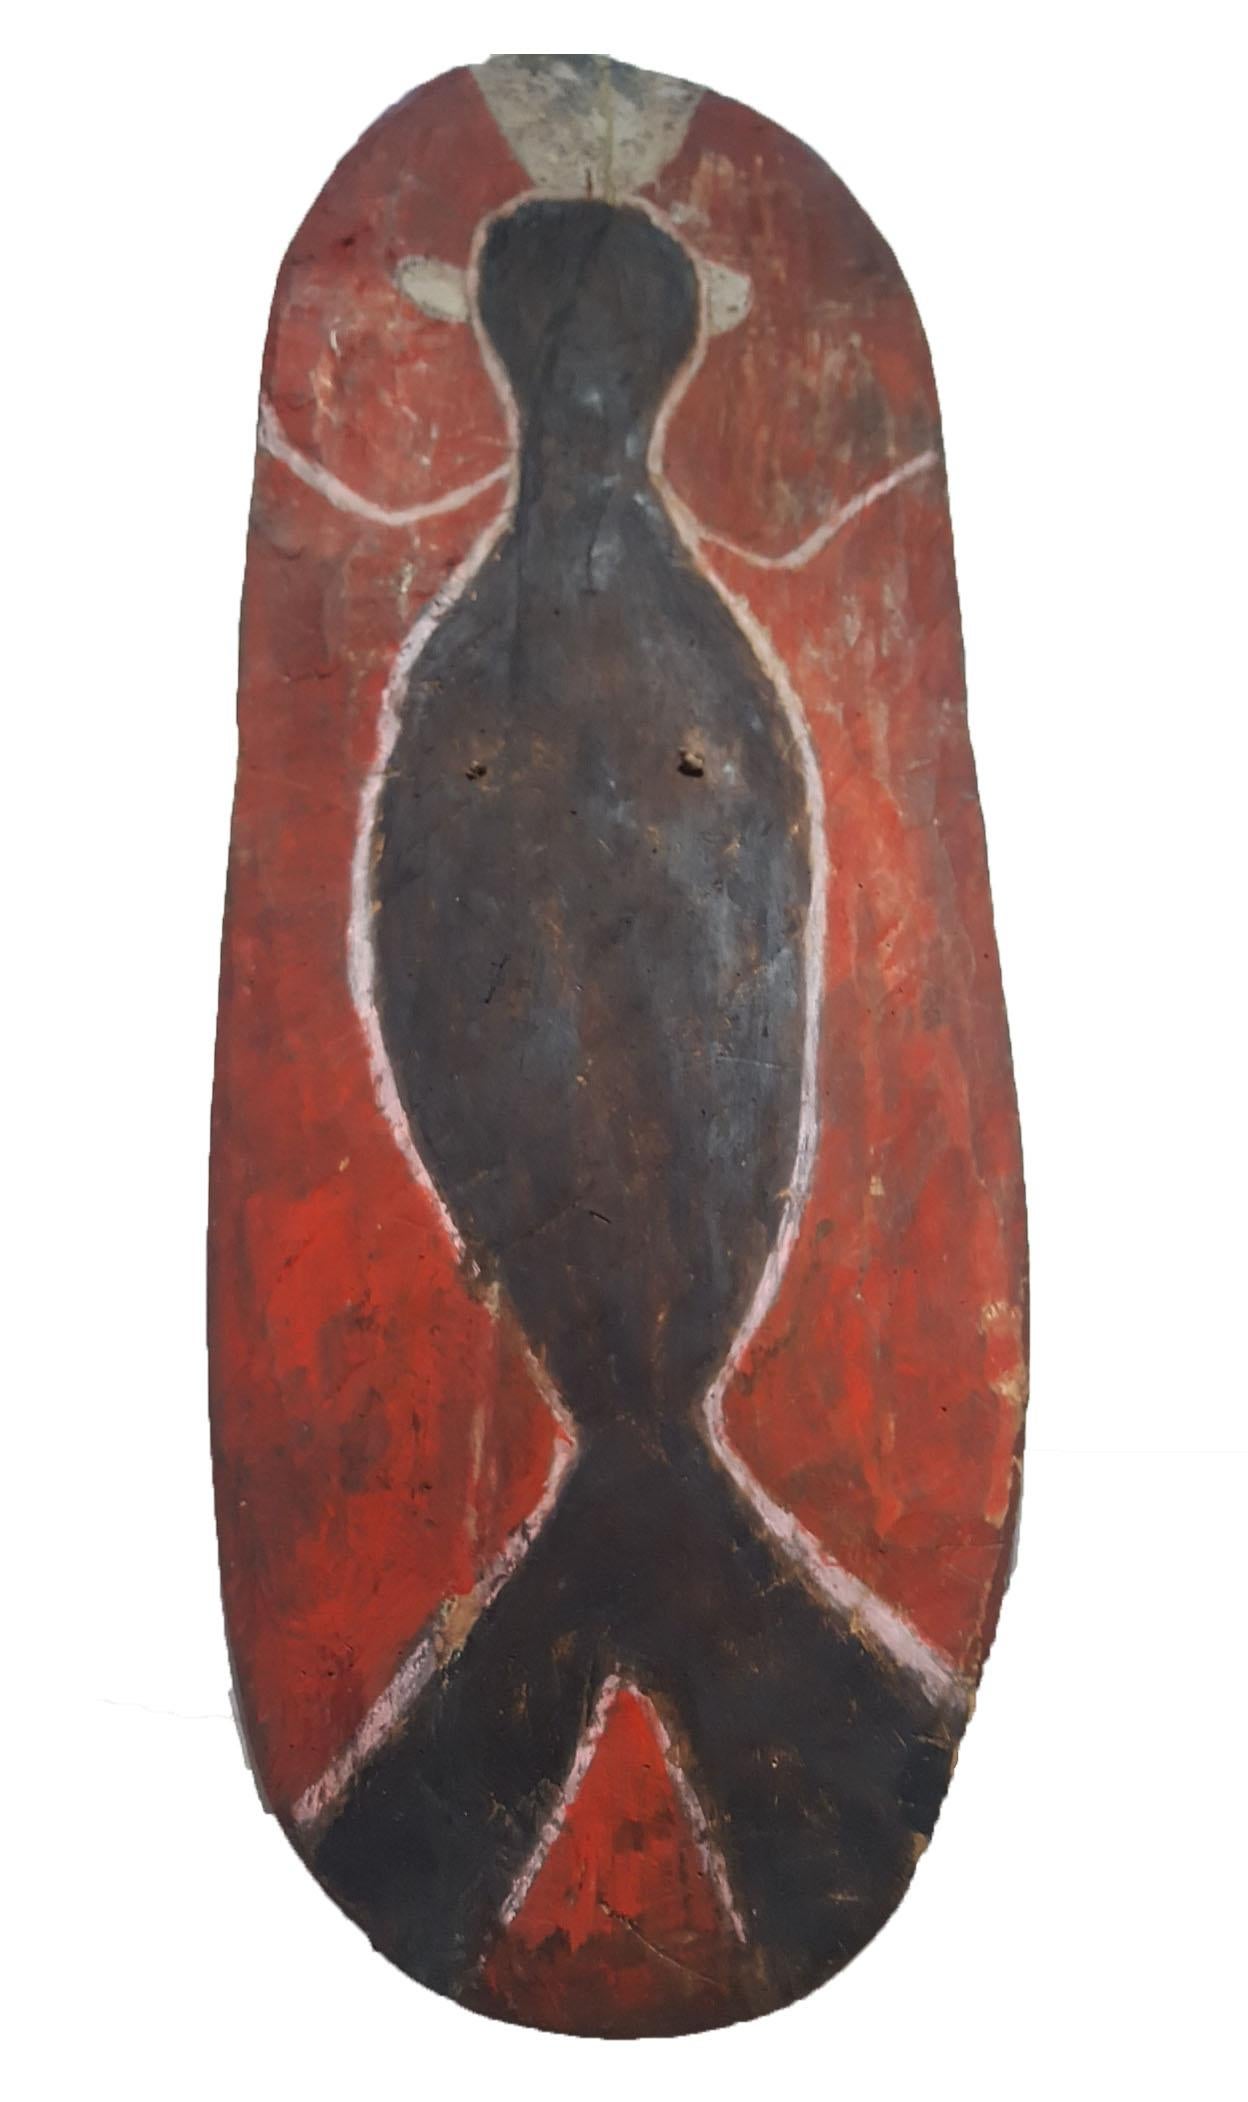 A Mendi war or dance shield with painted figure 
Mendi Valley, Southern Highlands, Papua New Guinea
With painted figure which is thought to represent a ancestor
Oval shaped medium weight wood shield with sling cord with red, white and black paint,